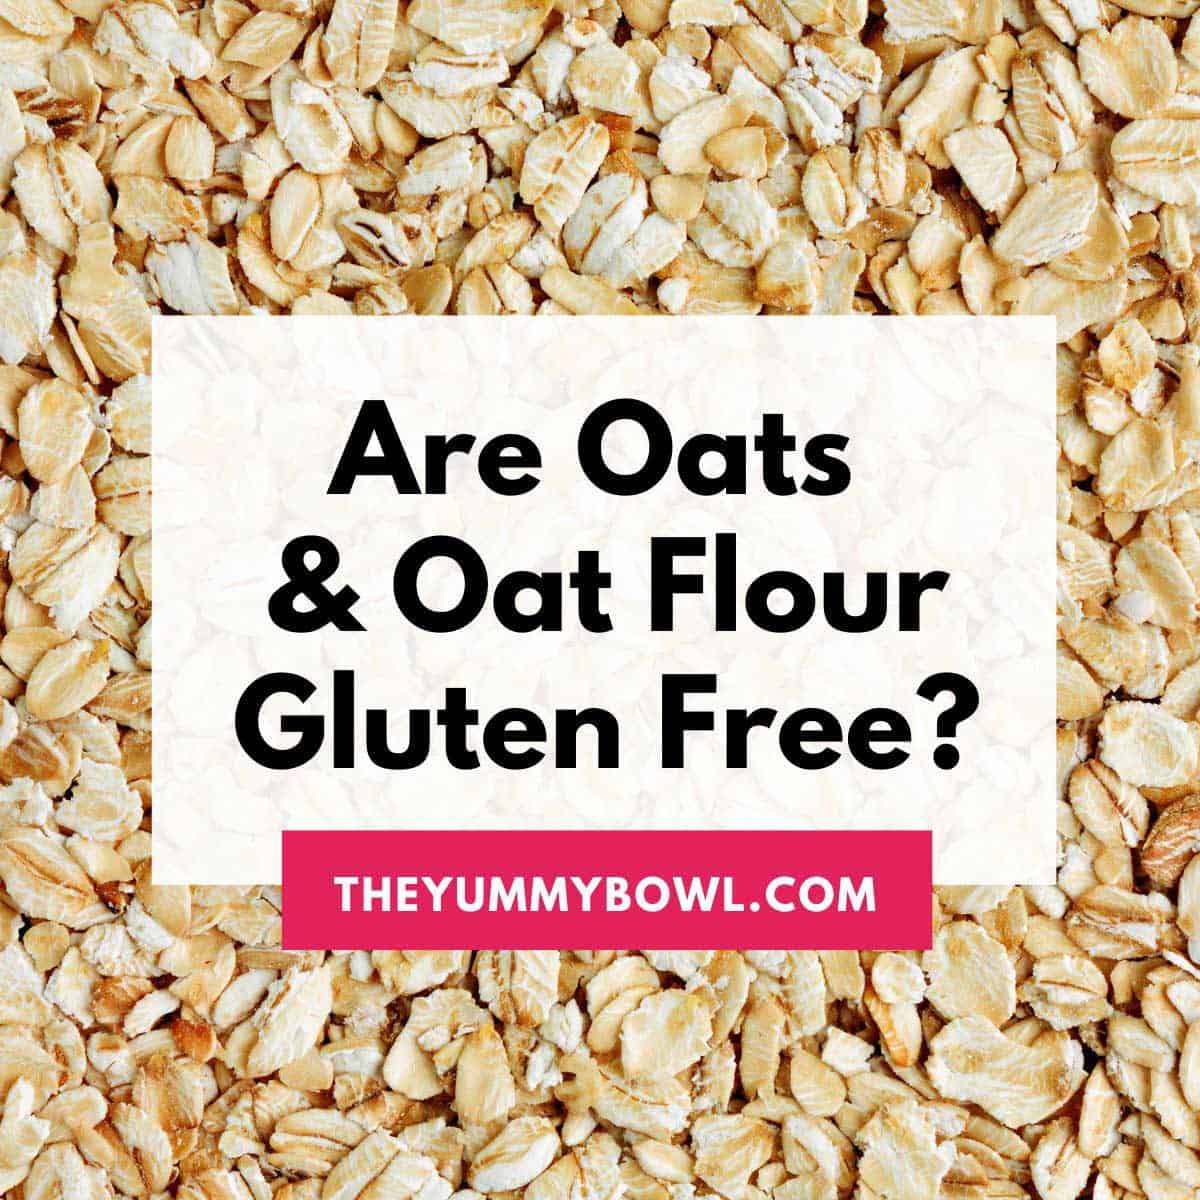 Oats Debunked: Are Oats and Oat Flour Gluten Free? - The Yummy Bowl